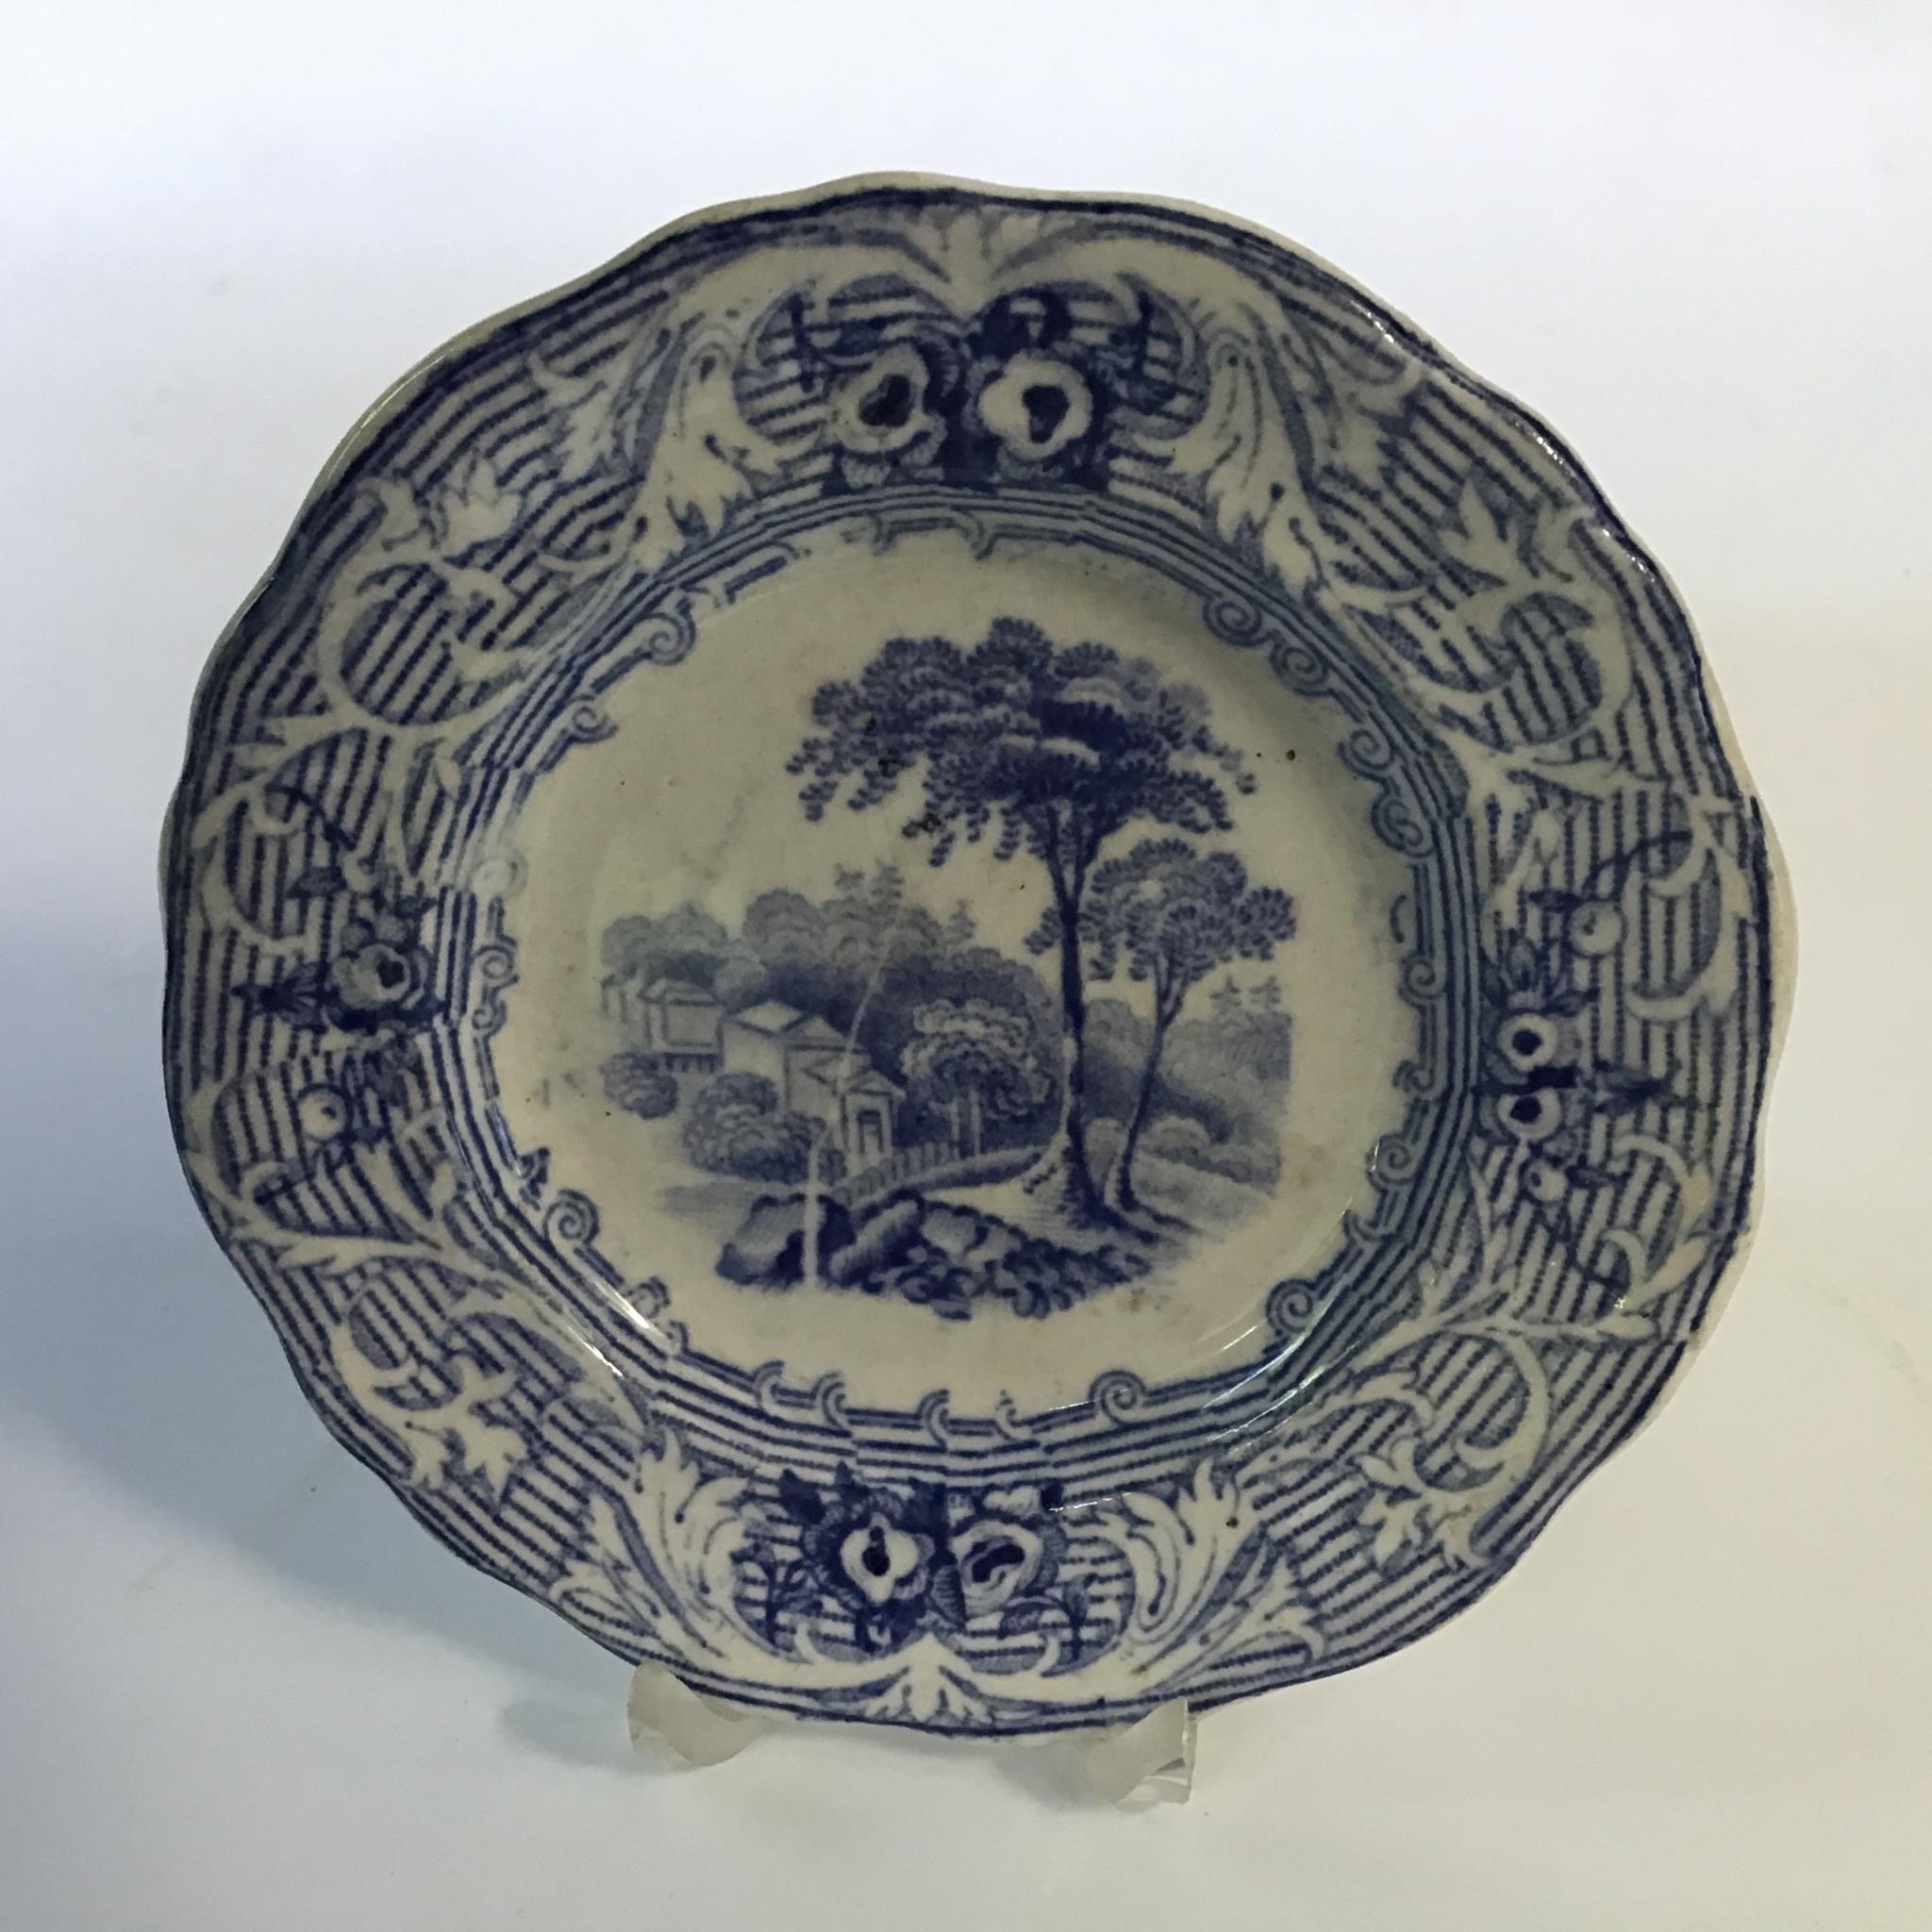 MINIATURE CANADIAN HISTORICAL PLATE GEORGEVILLE PQ